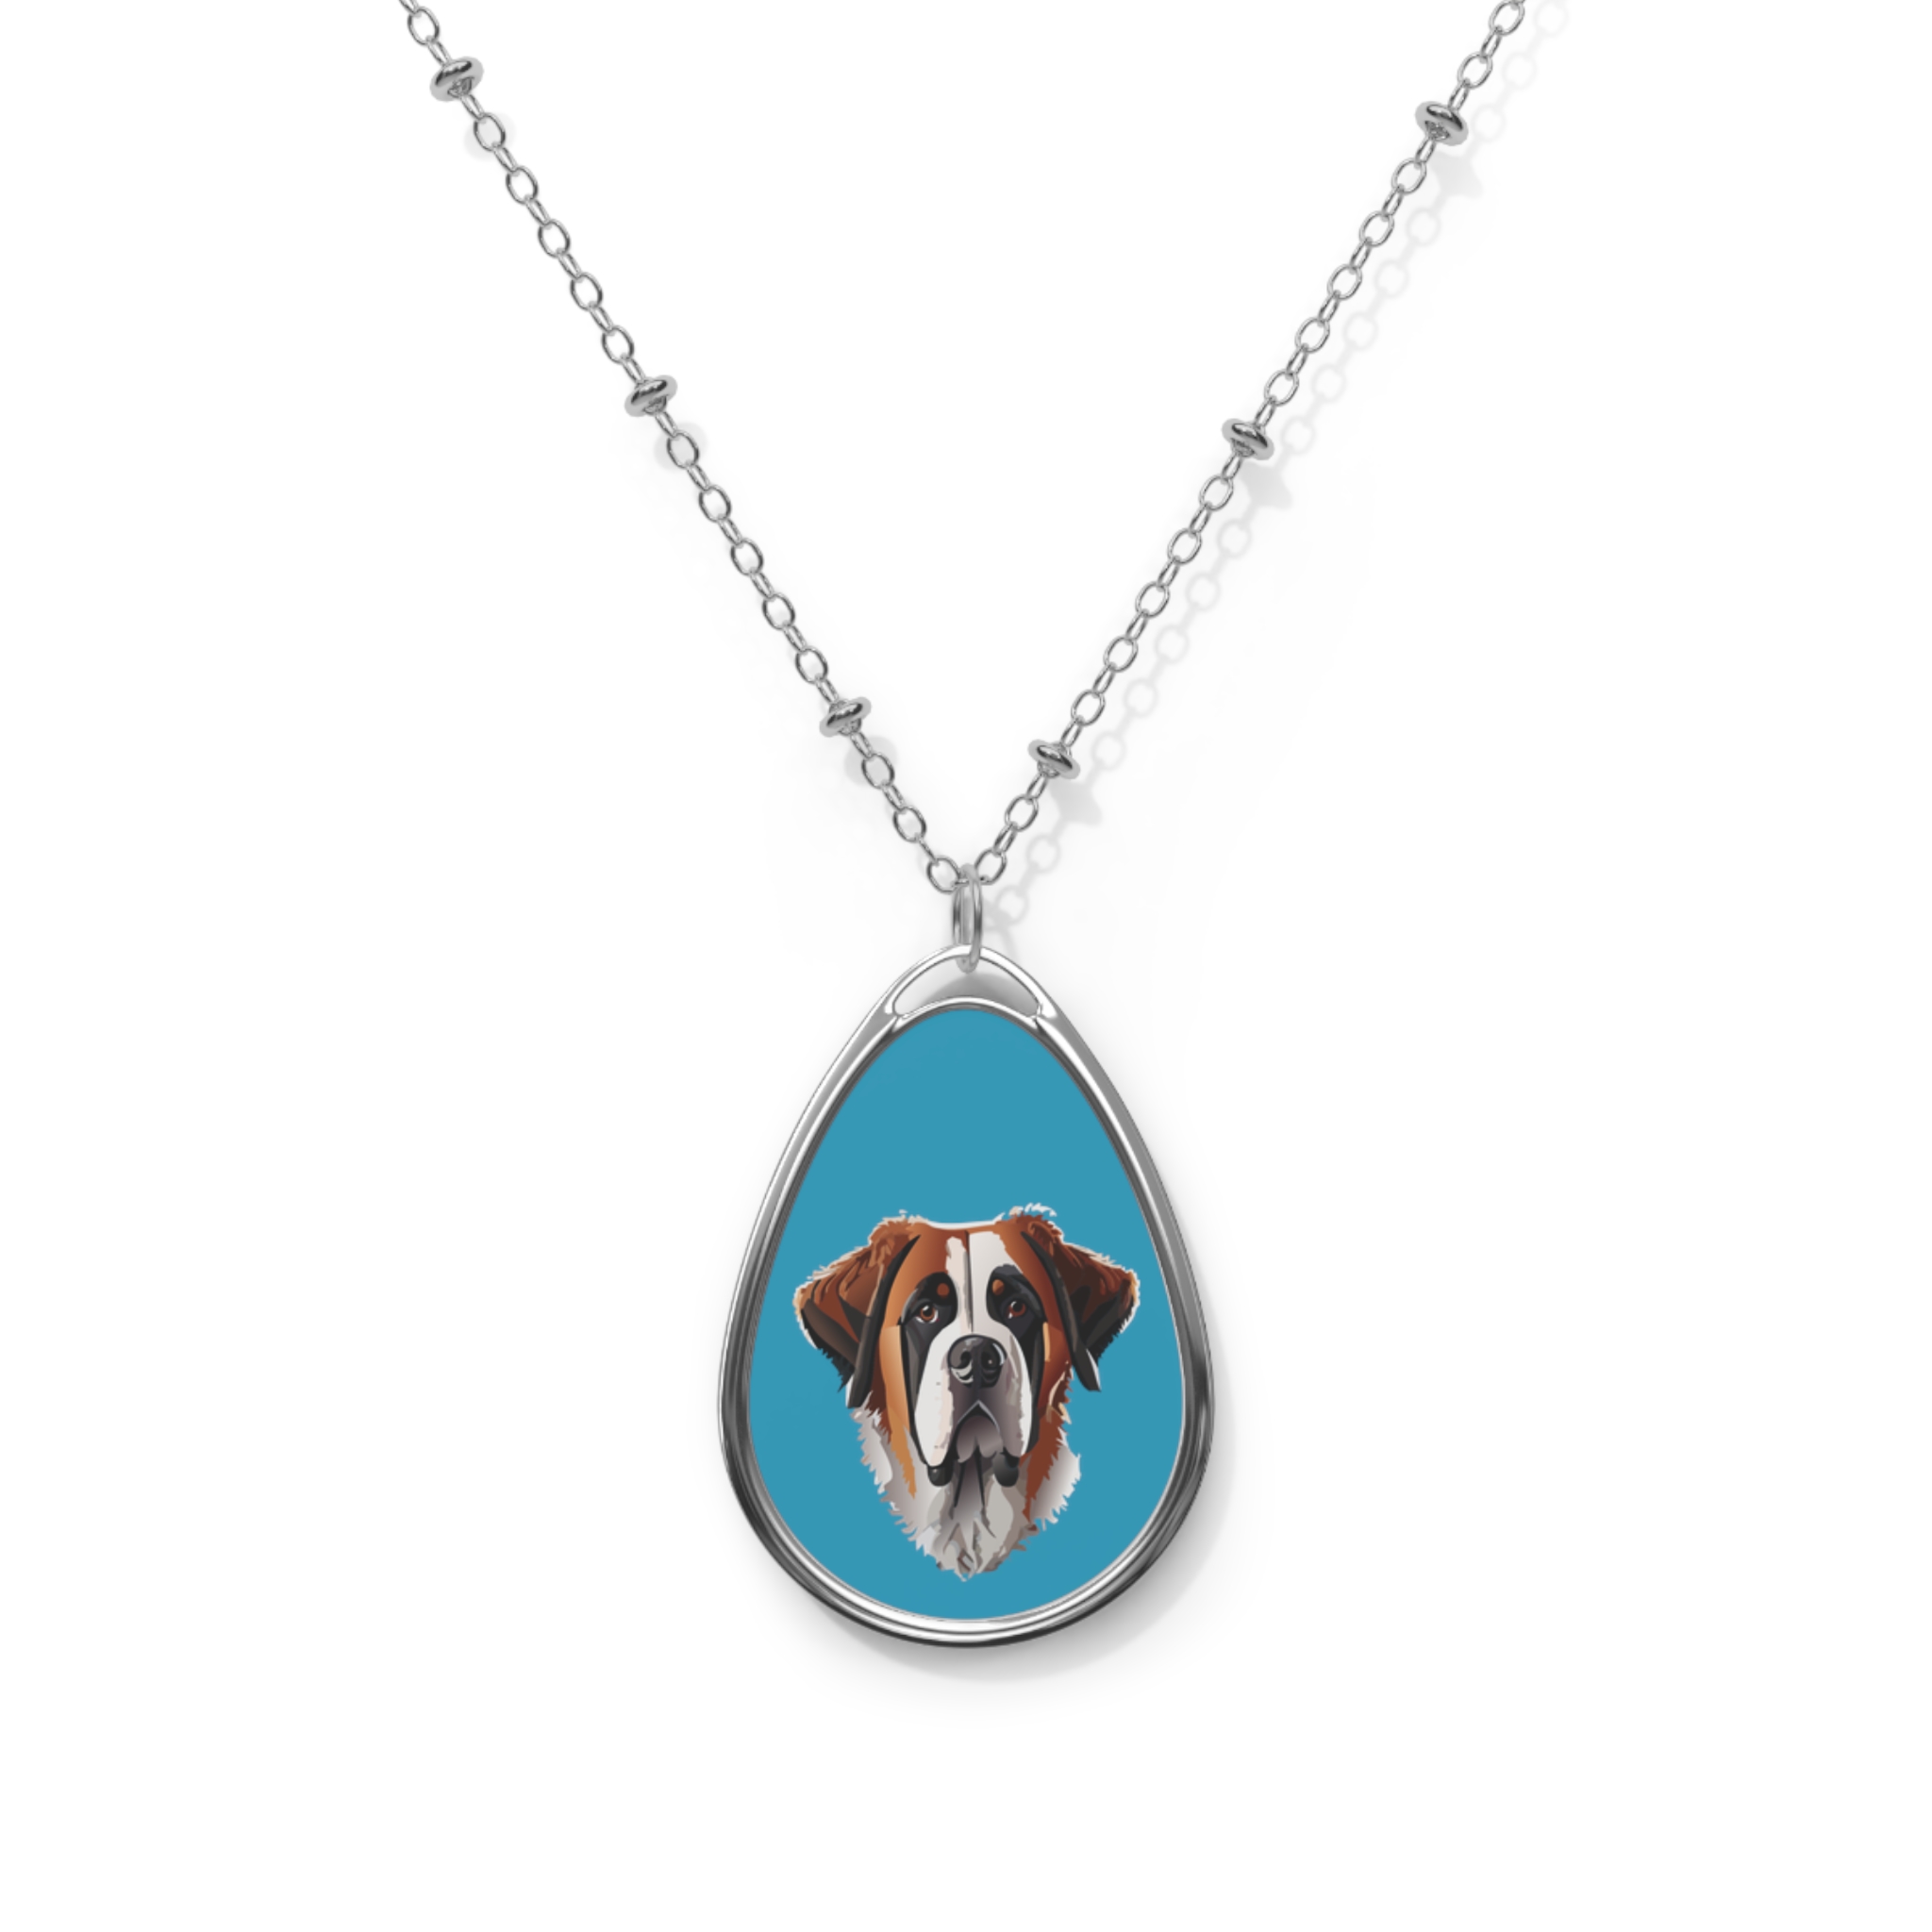 Oval Necklace- Personalized Pet